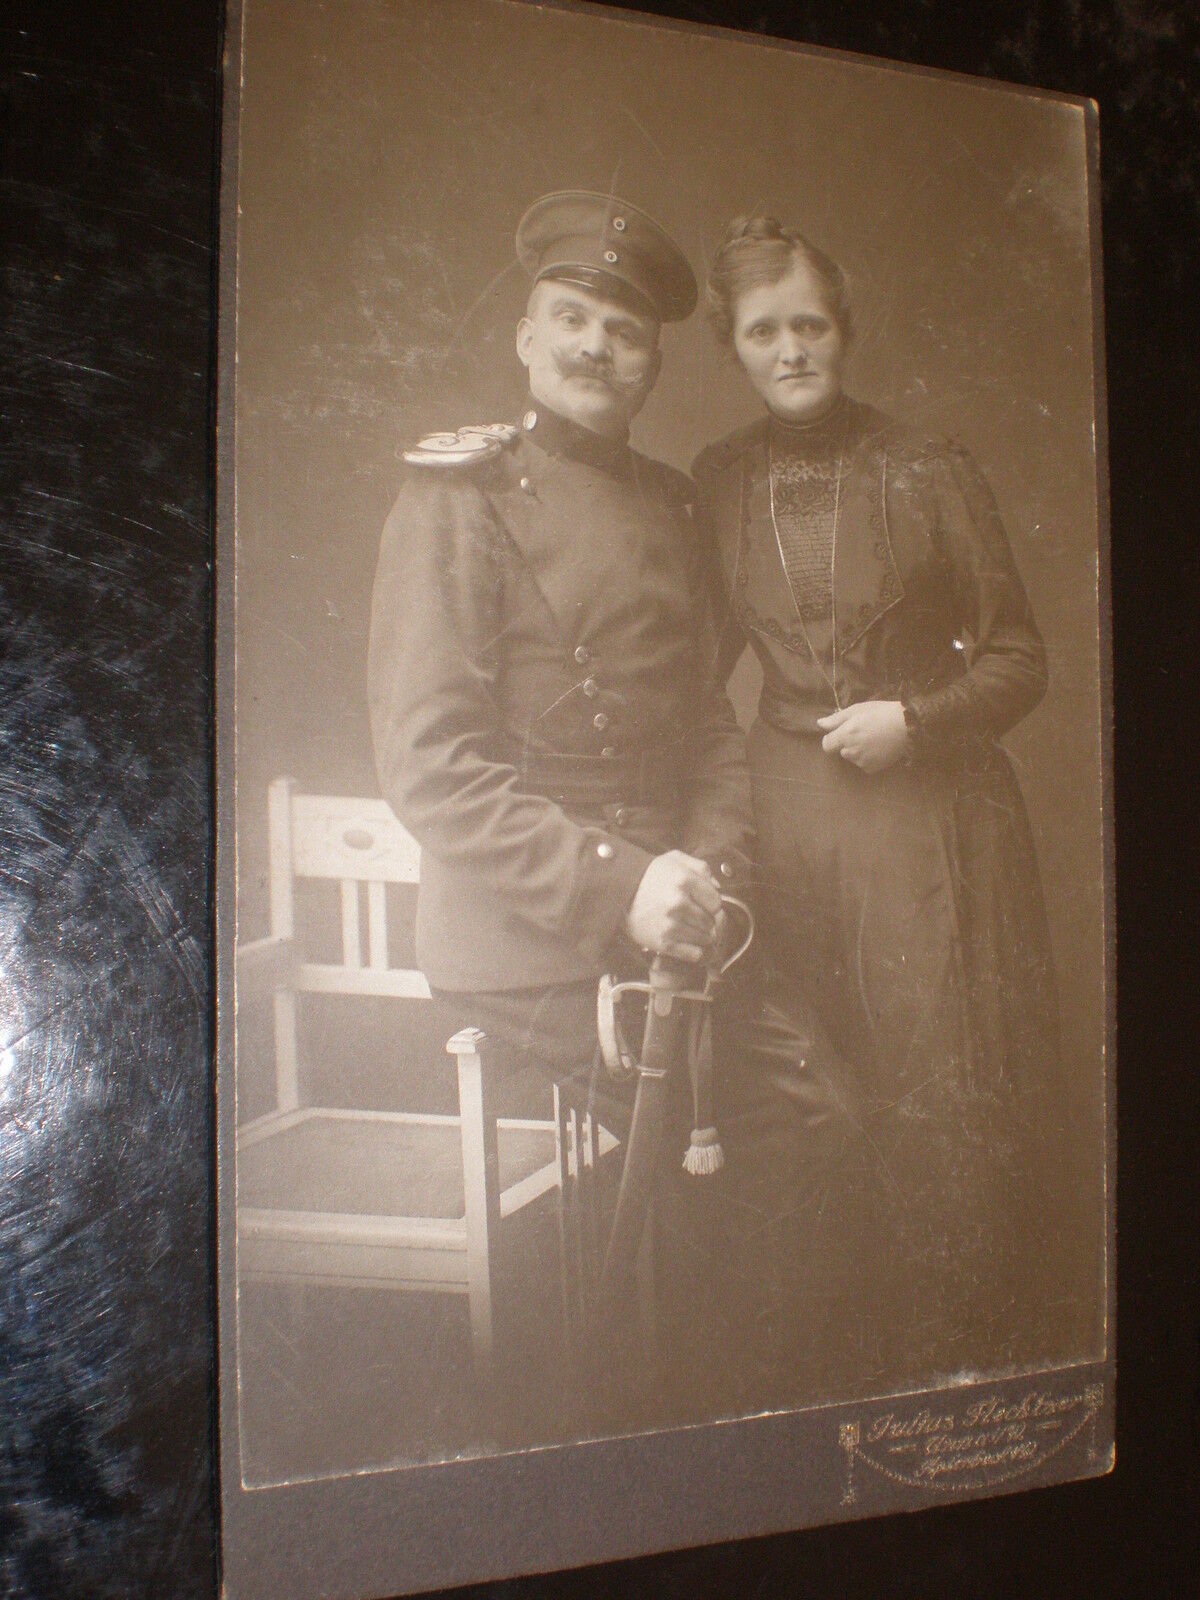 Cdv cabinet photograph soldier sword wife by Flechtner at Unna Germany c1900s